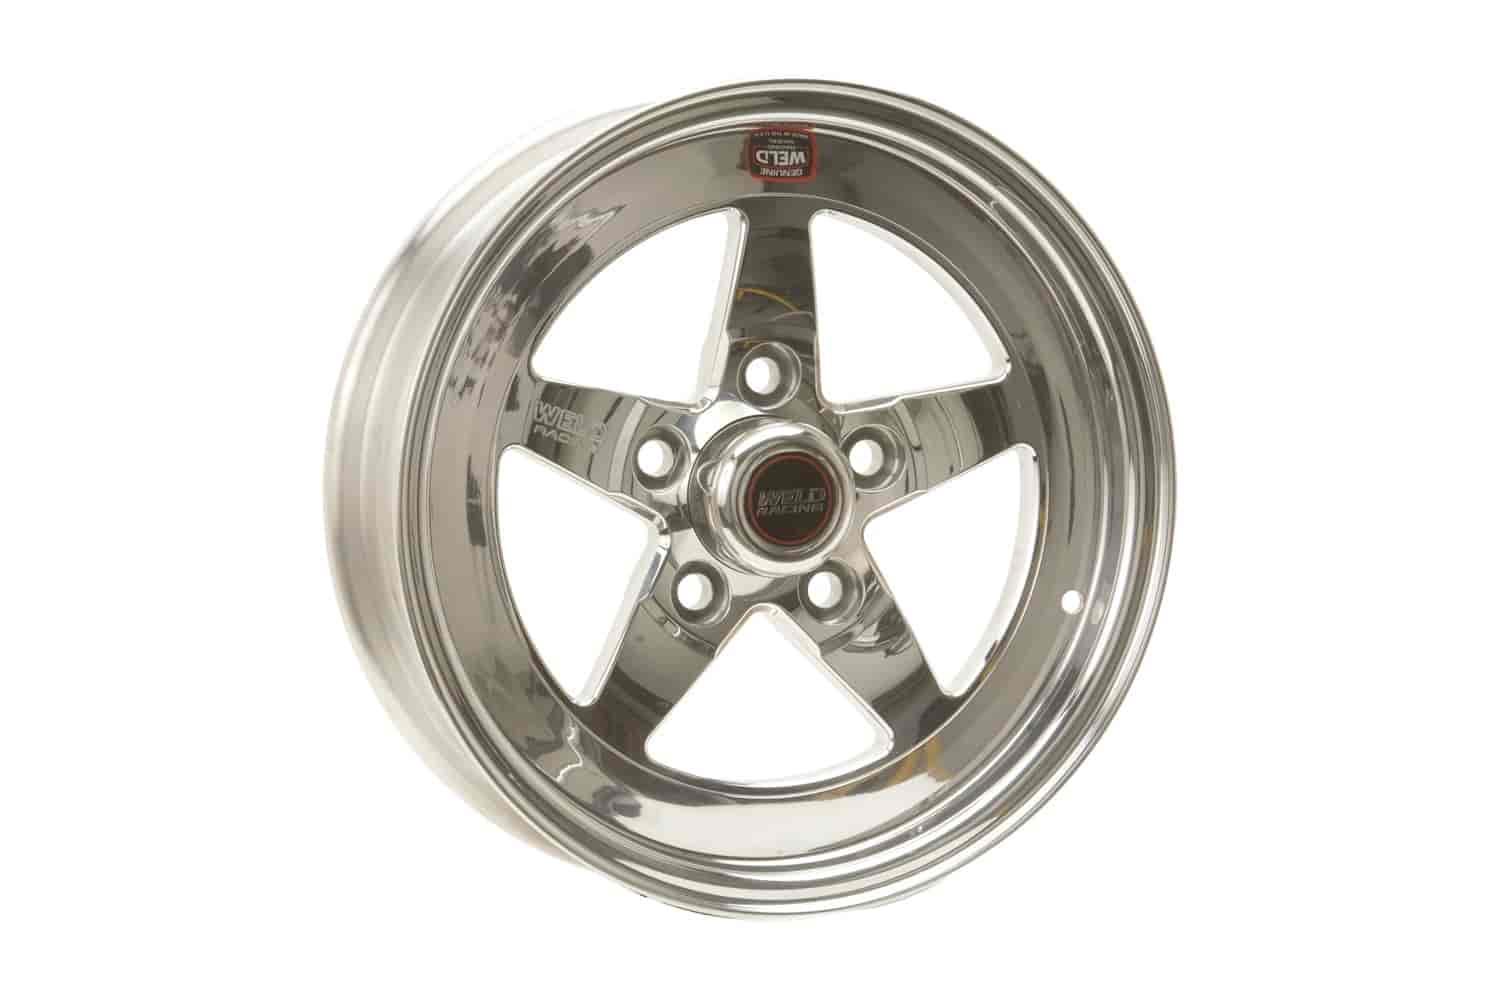 RT-S Series Wheel Size: 15" x 4" Bolt Circle: 5 x 4-1/2" Back Space: 2-1/2"